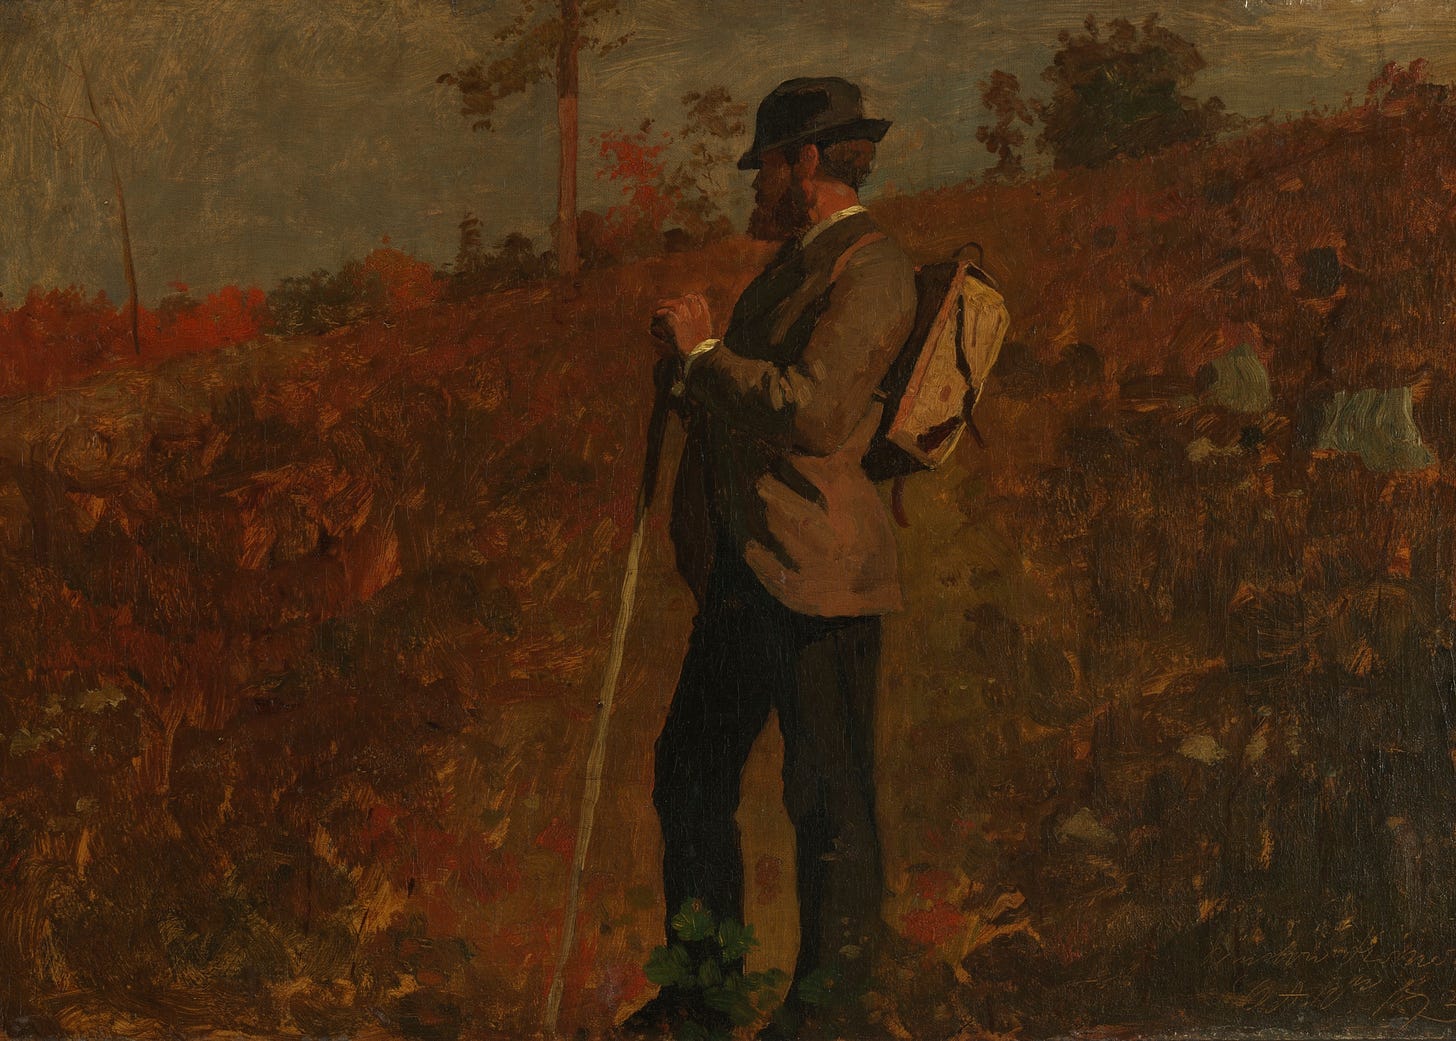 Man with a Knapsack (1873)